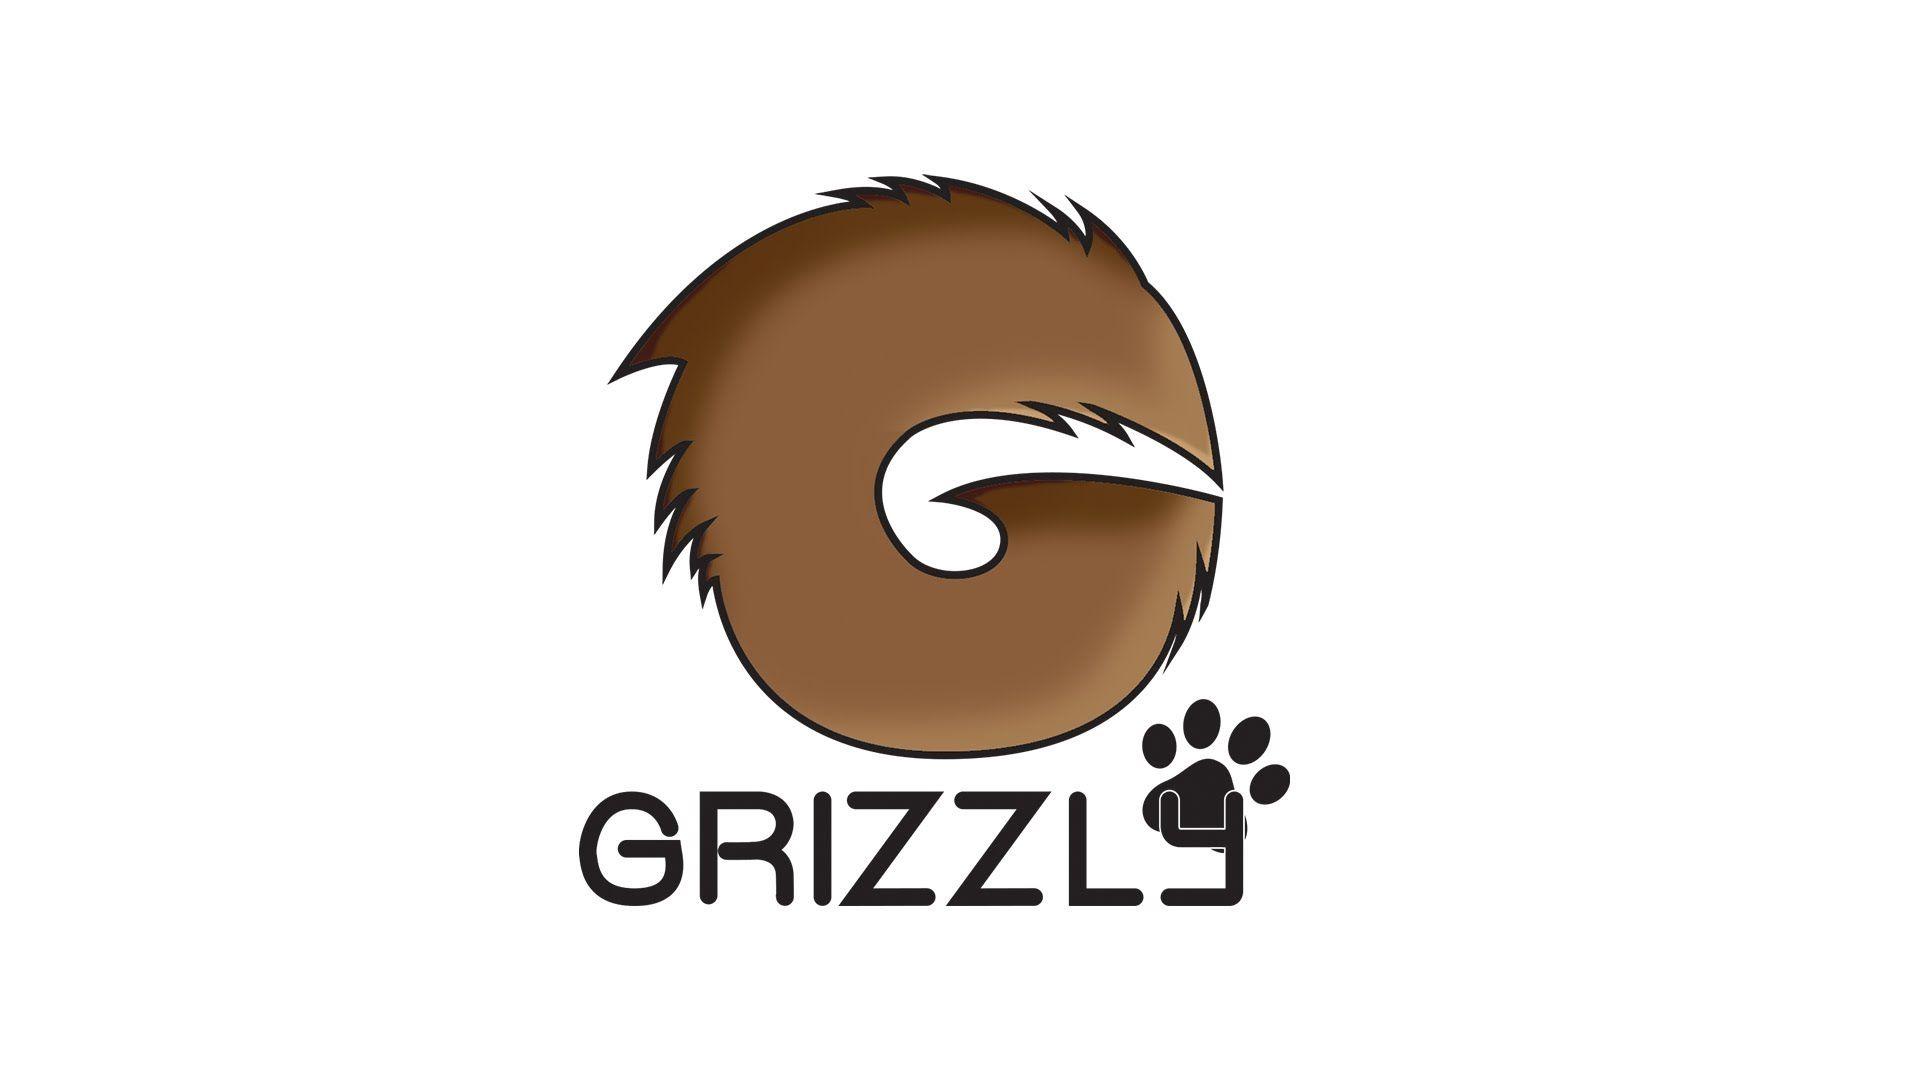 Grizzly Graphic Designs